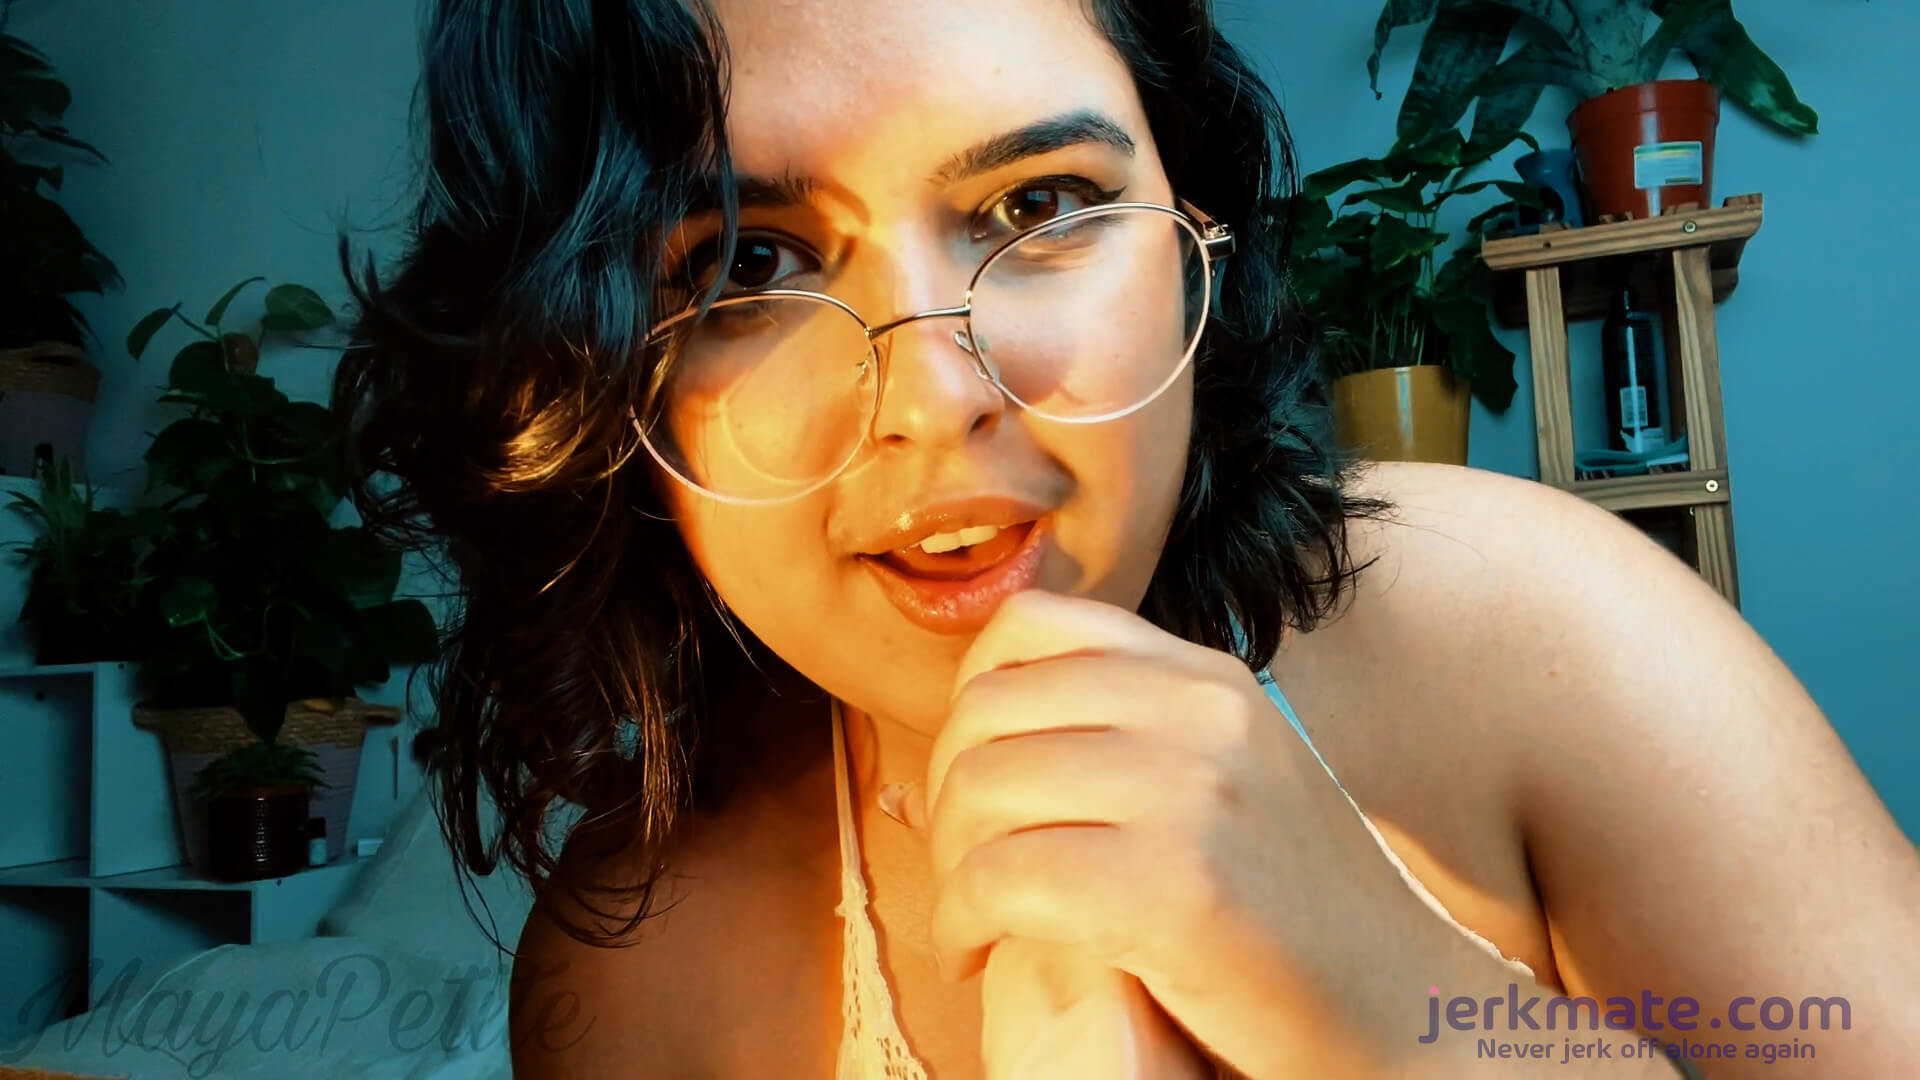 Come and jerk it with camgirl MayaPetite